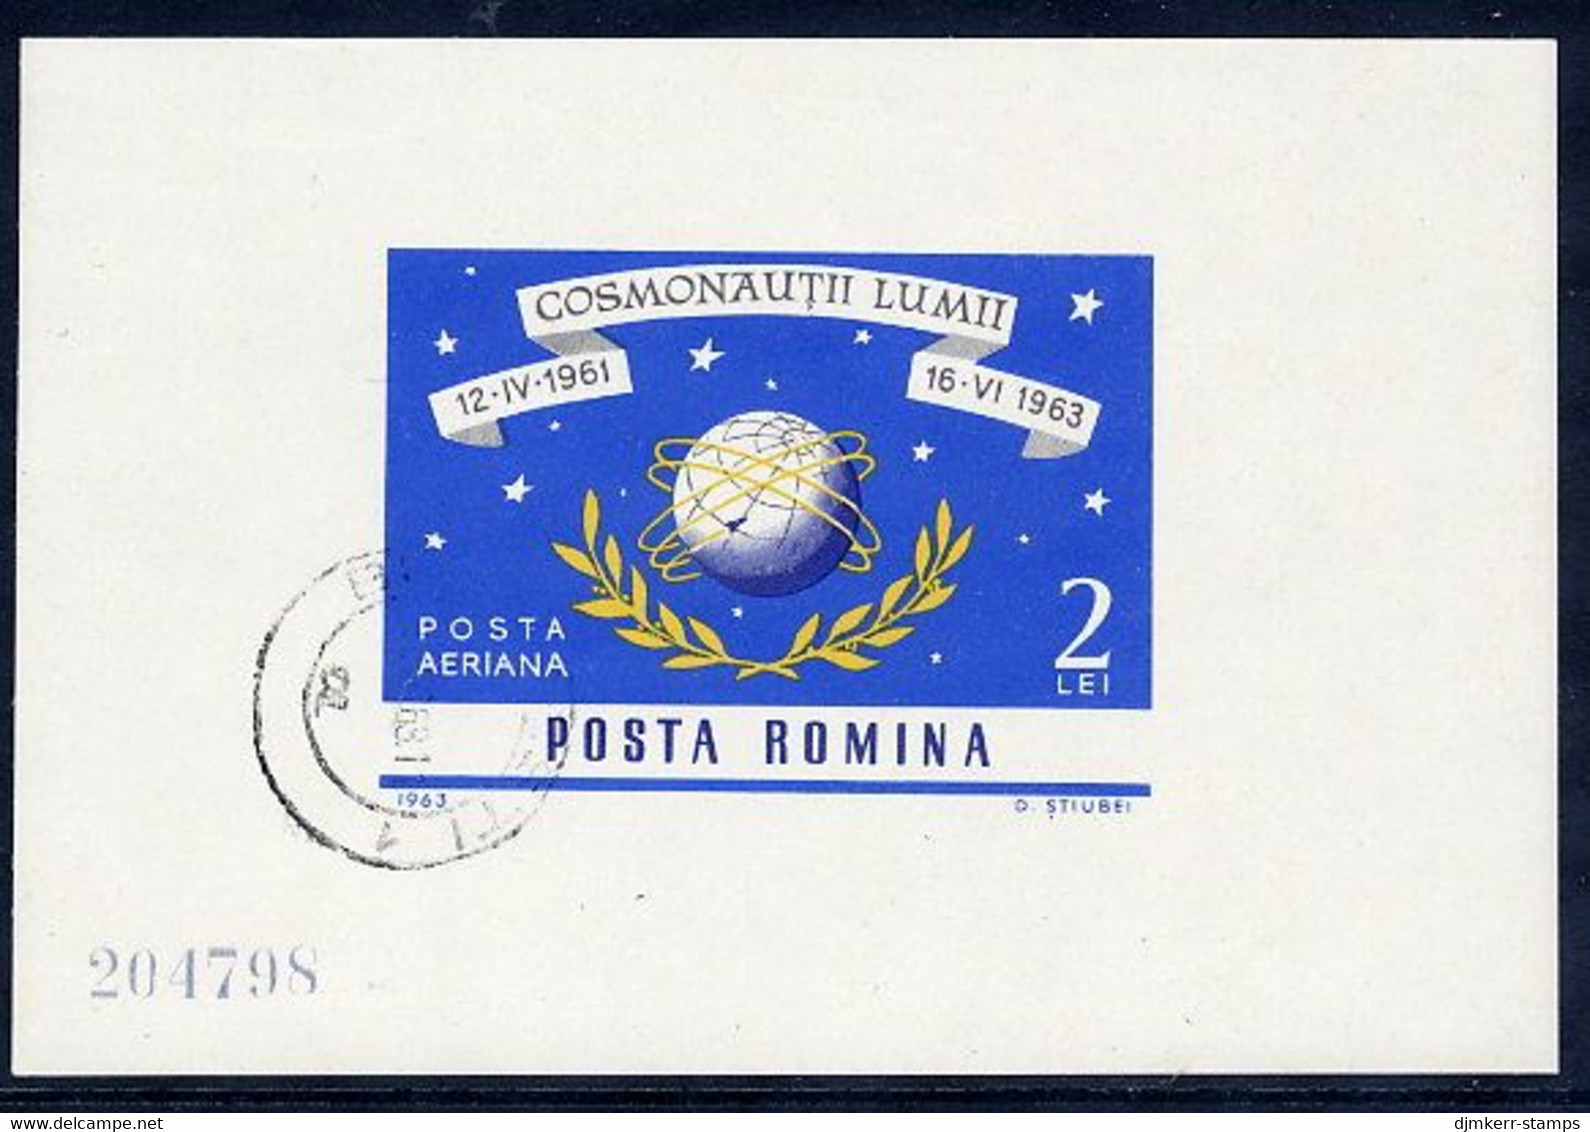 ROMANIA 1964 Space Travel Block Used.  Michel Block 56 - Used Stamps